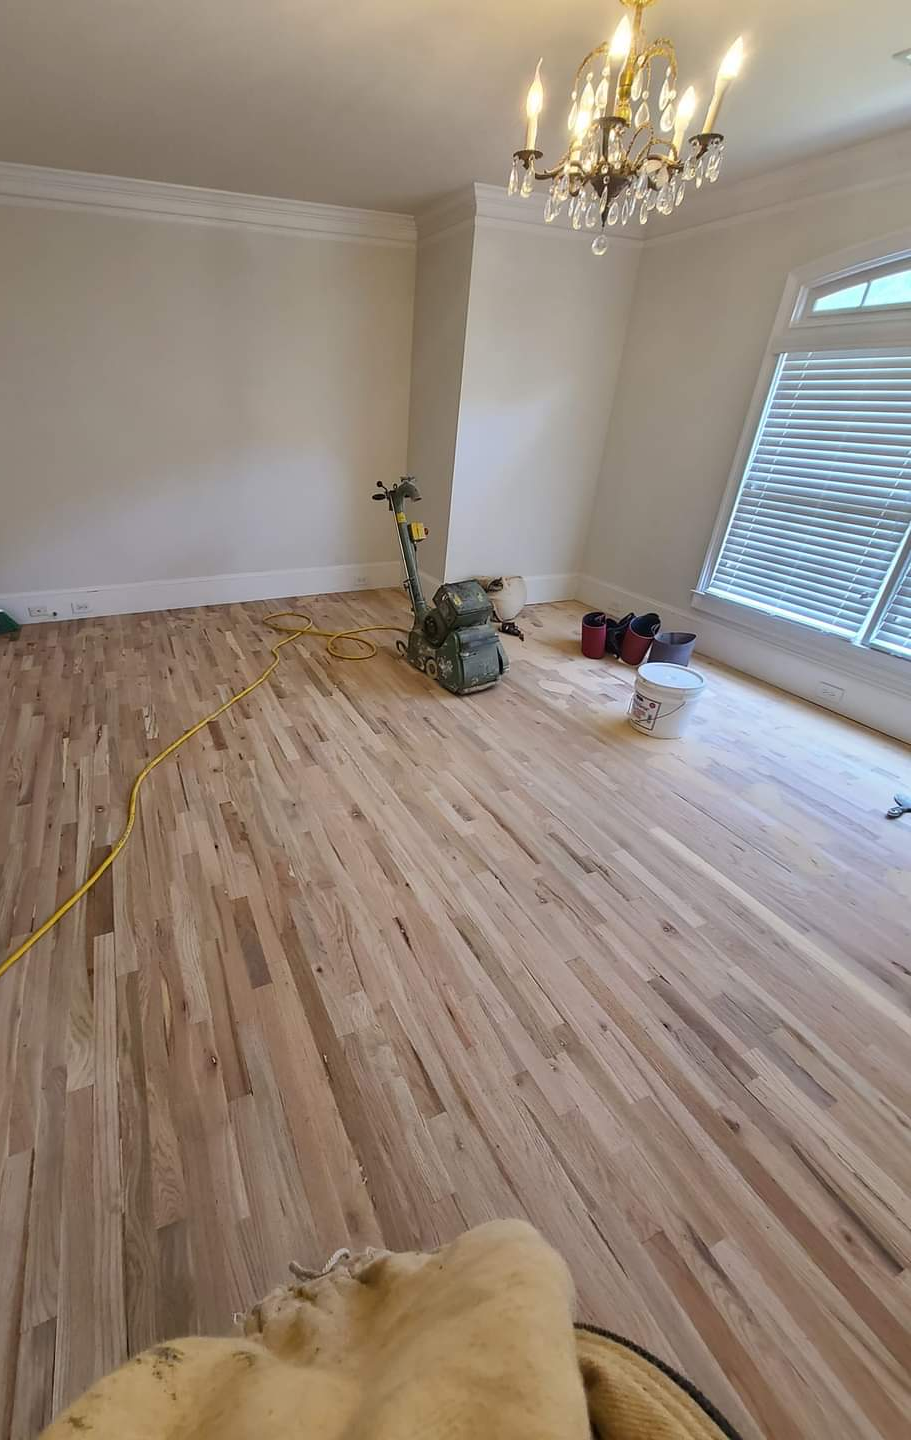 Polishing and sanding this freshly installed solid hard wood flooring.